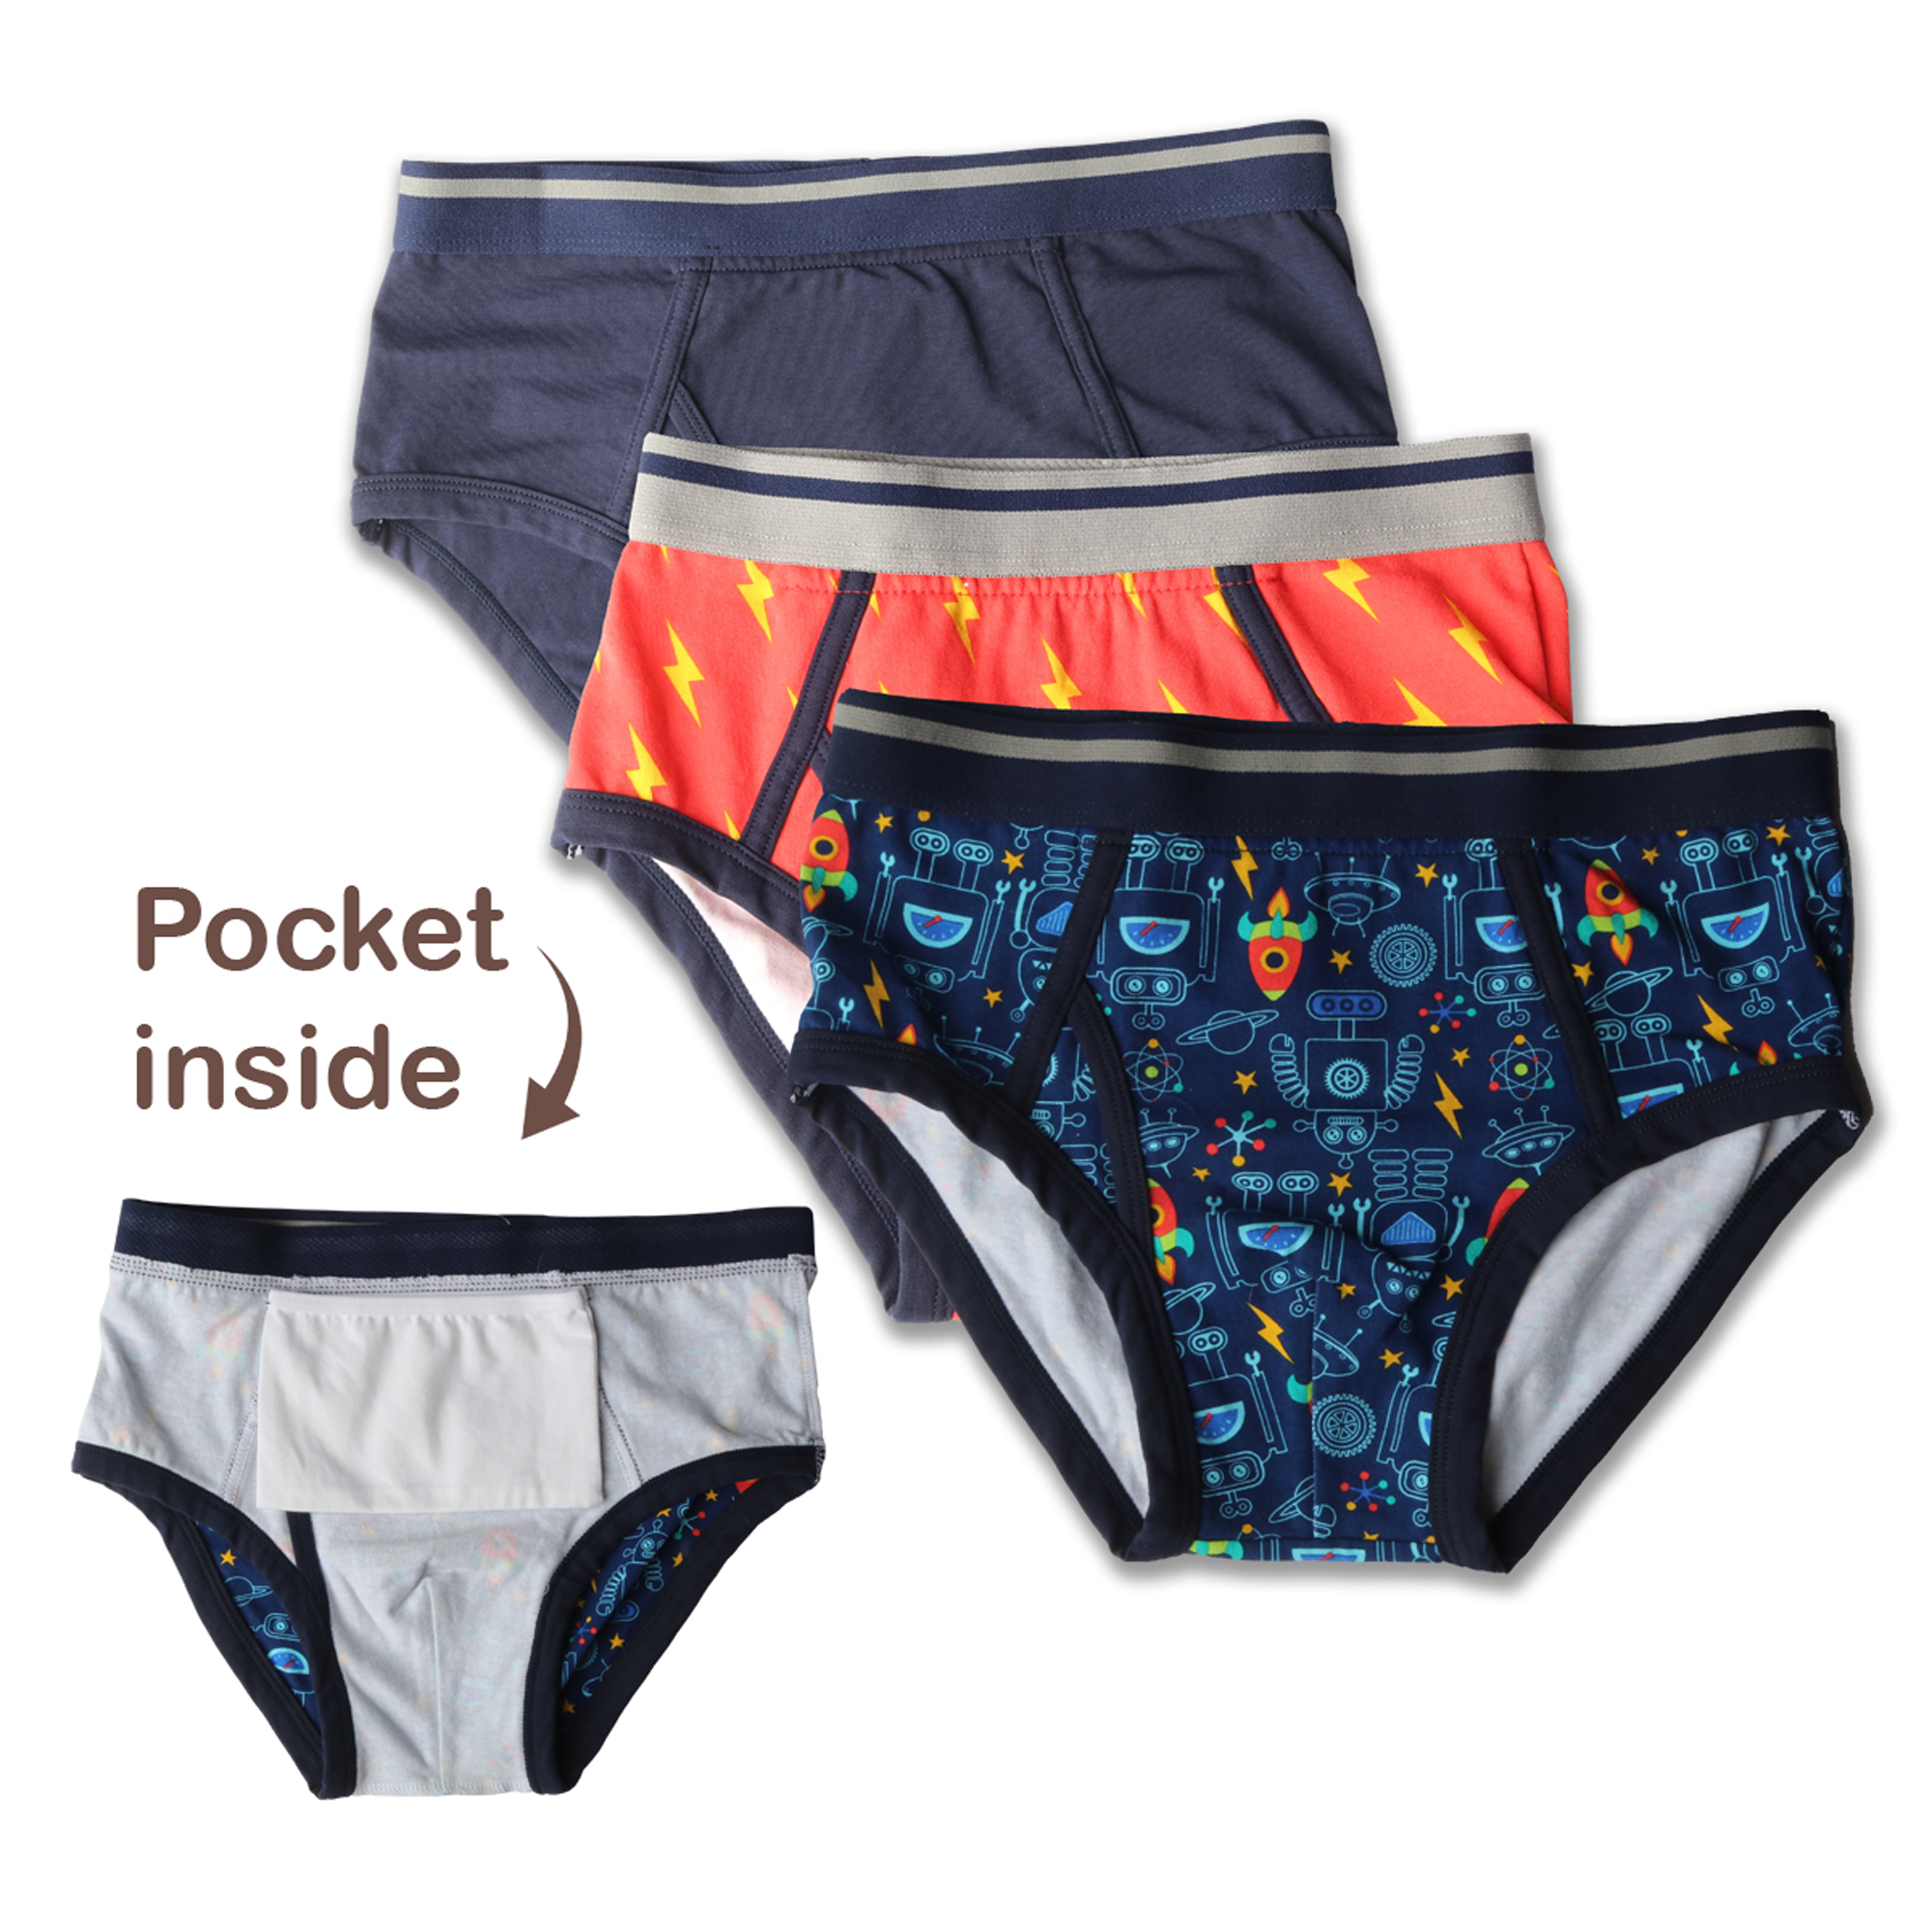 My Private Pocket Underwear for Boys - Variety 3 Pack - National